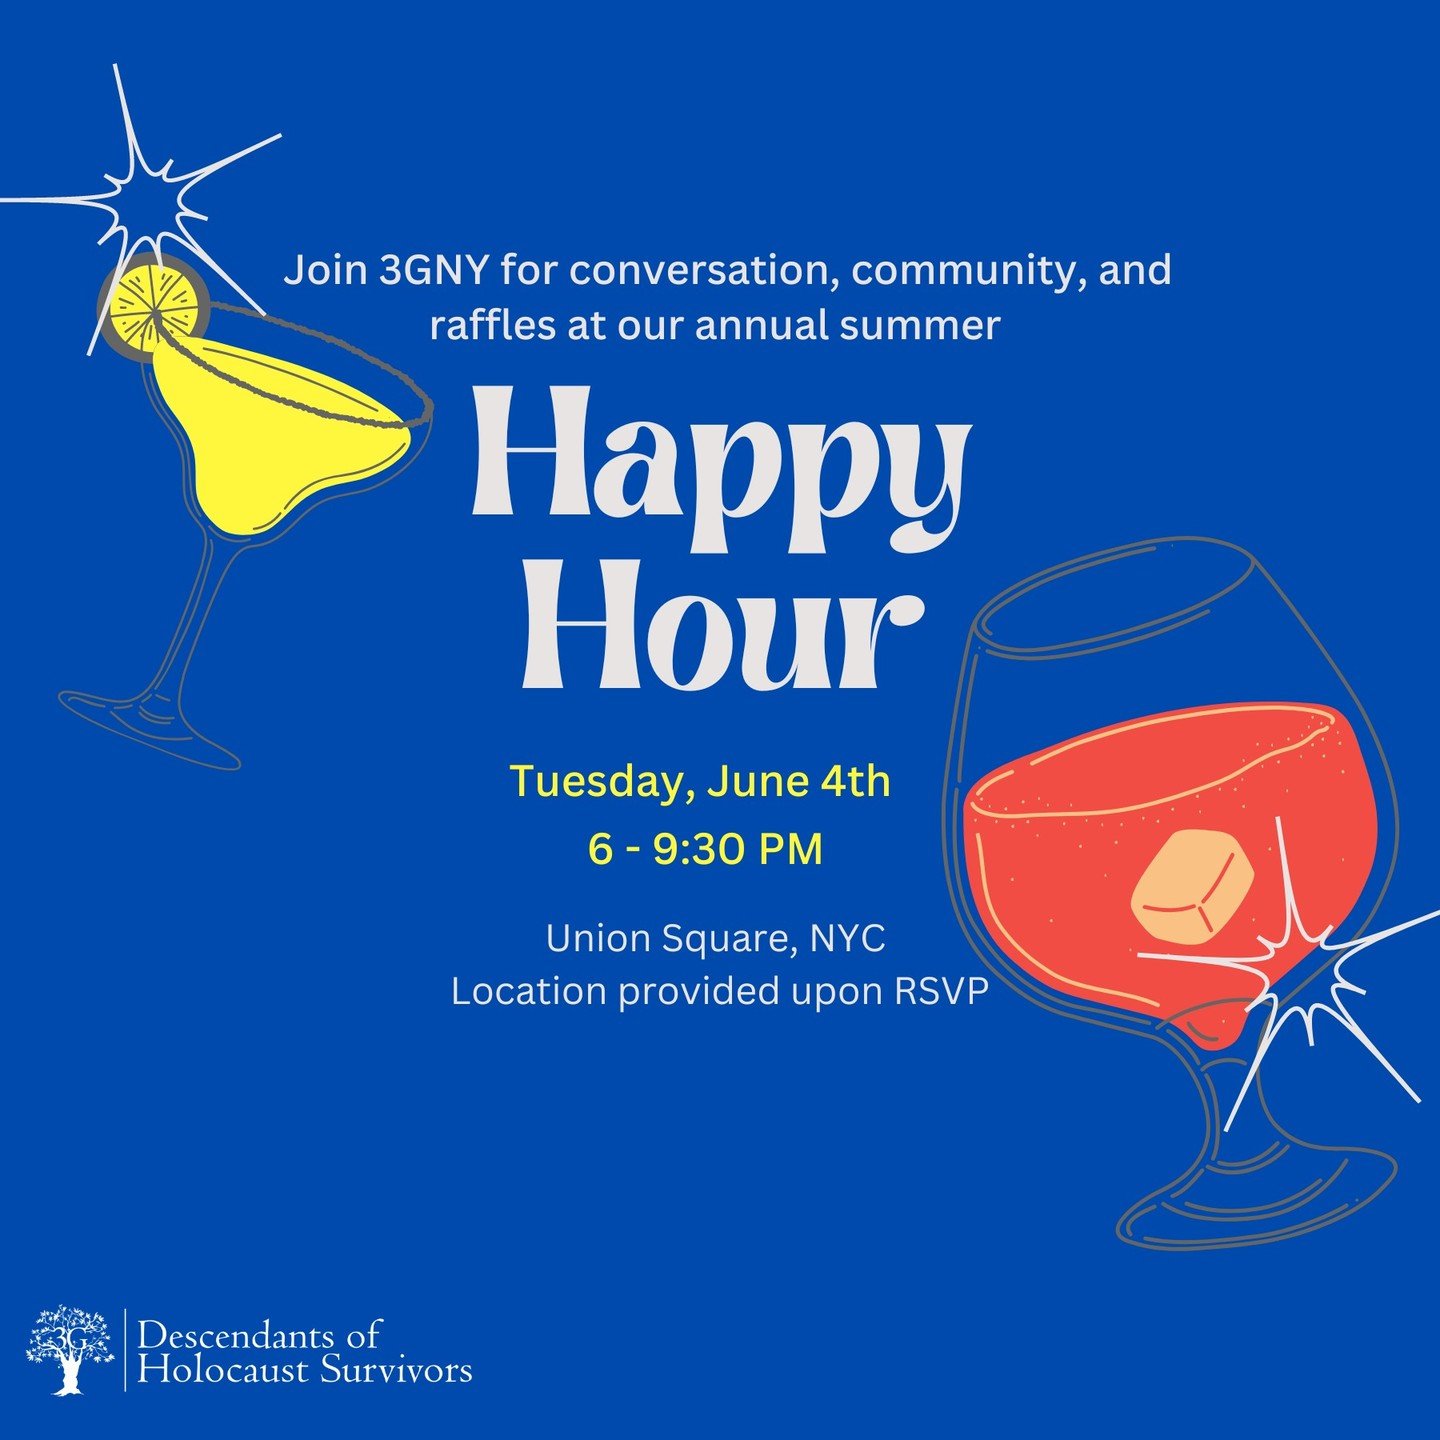 Time to get together! Join 3GNY for drinks, raffles, and great conversations to kick off summer and honor Holocaust Survivors Day with local 3Gs and supporters of our community.

Early bird tickets available thru May 27! 

Looking forward to seeing y